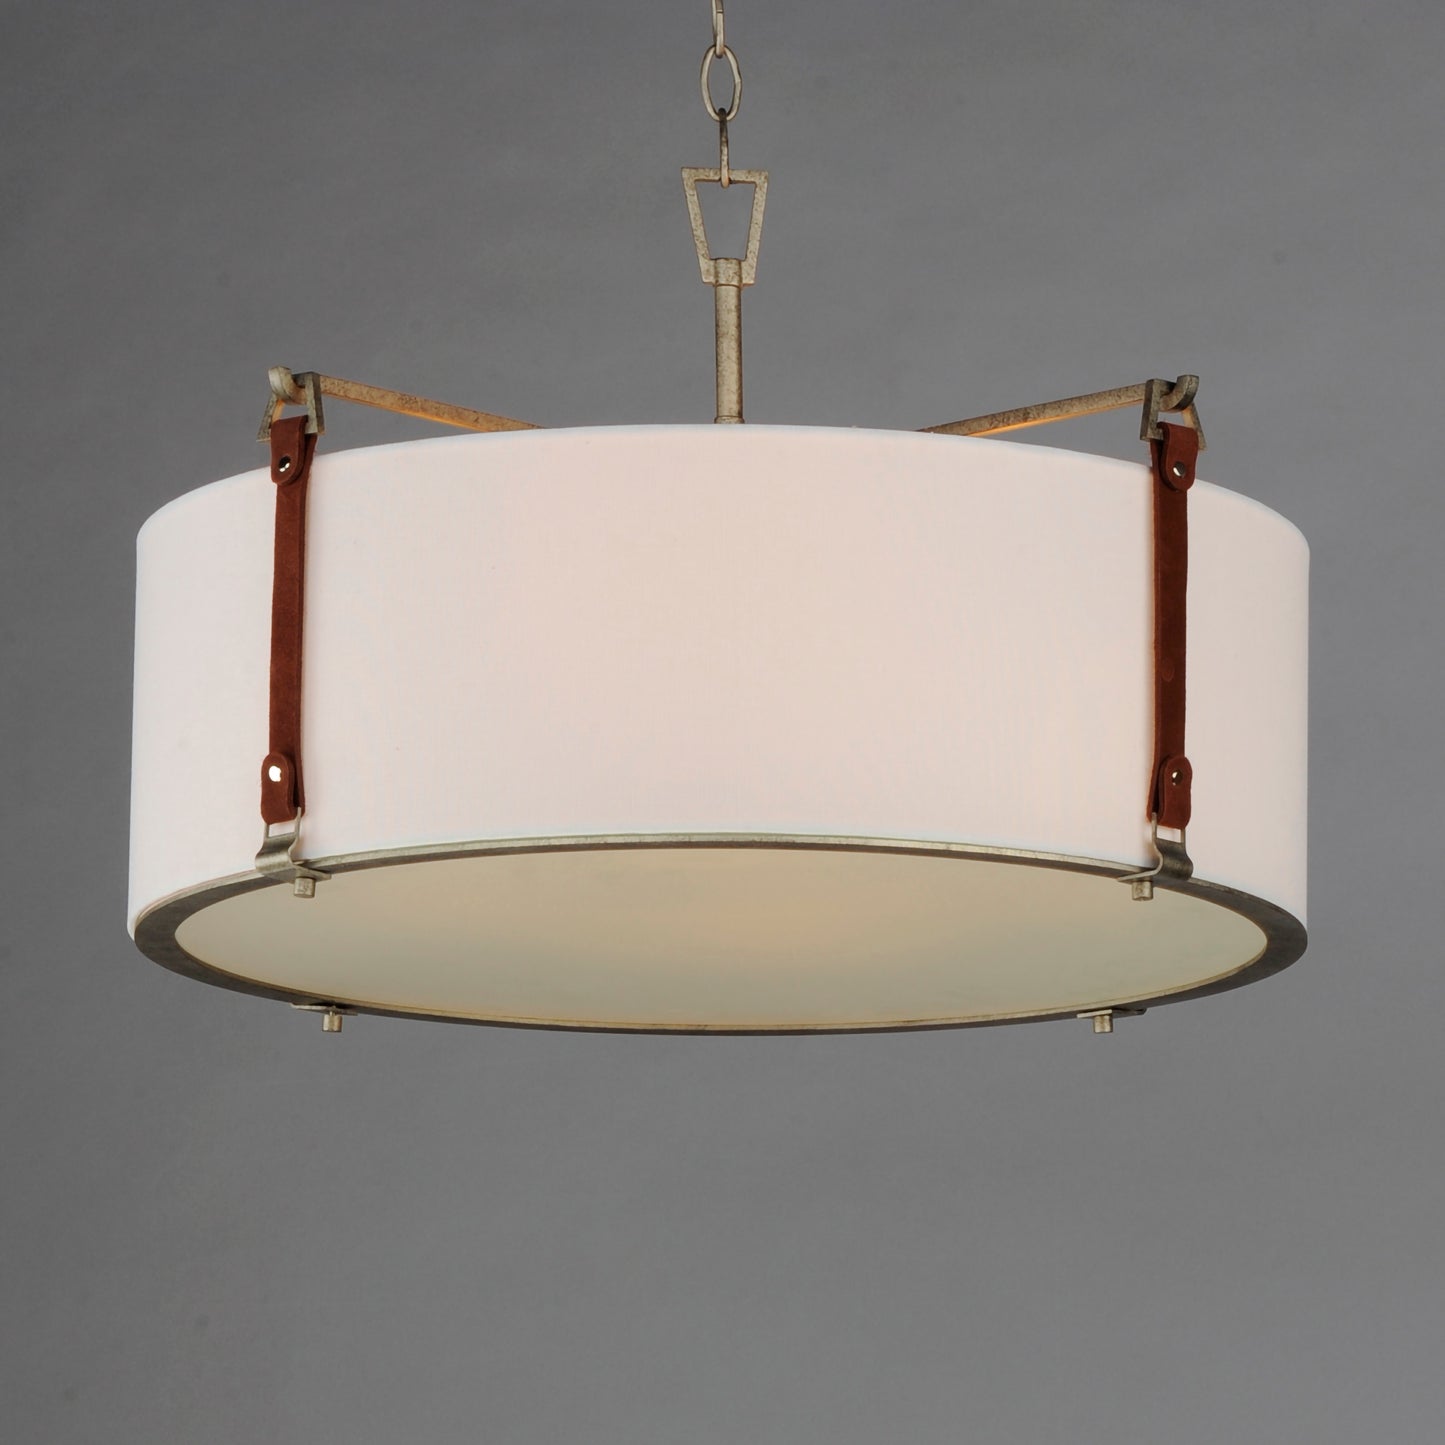 16135FTWZBSD - 4 Light Sausalito 24" Pendant - Weathered Zinc / Brown Suede